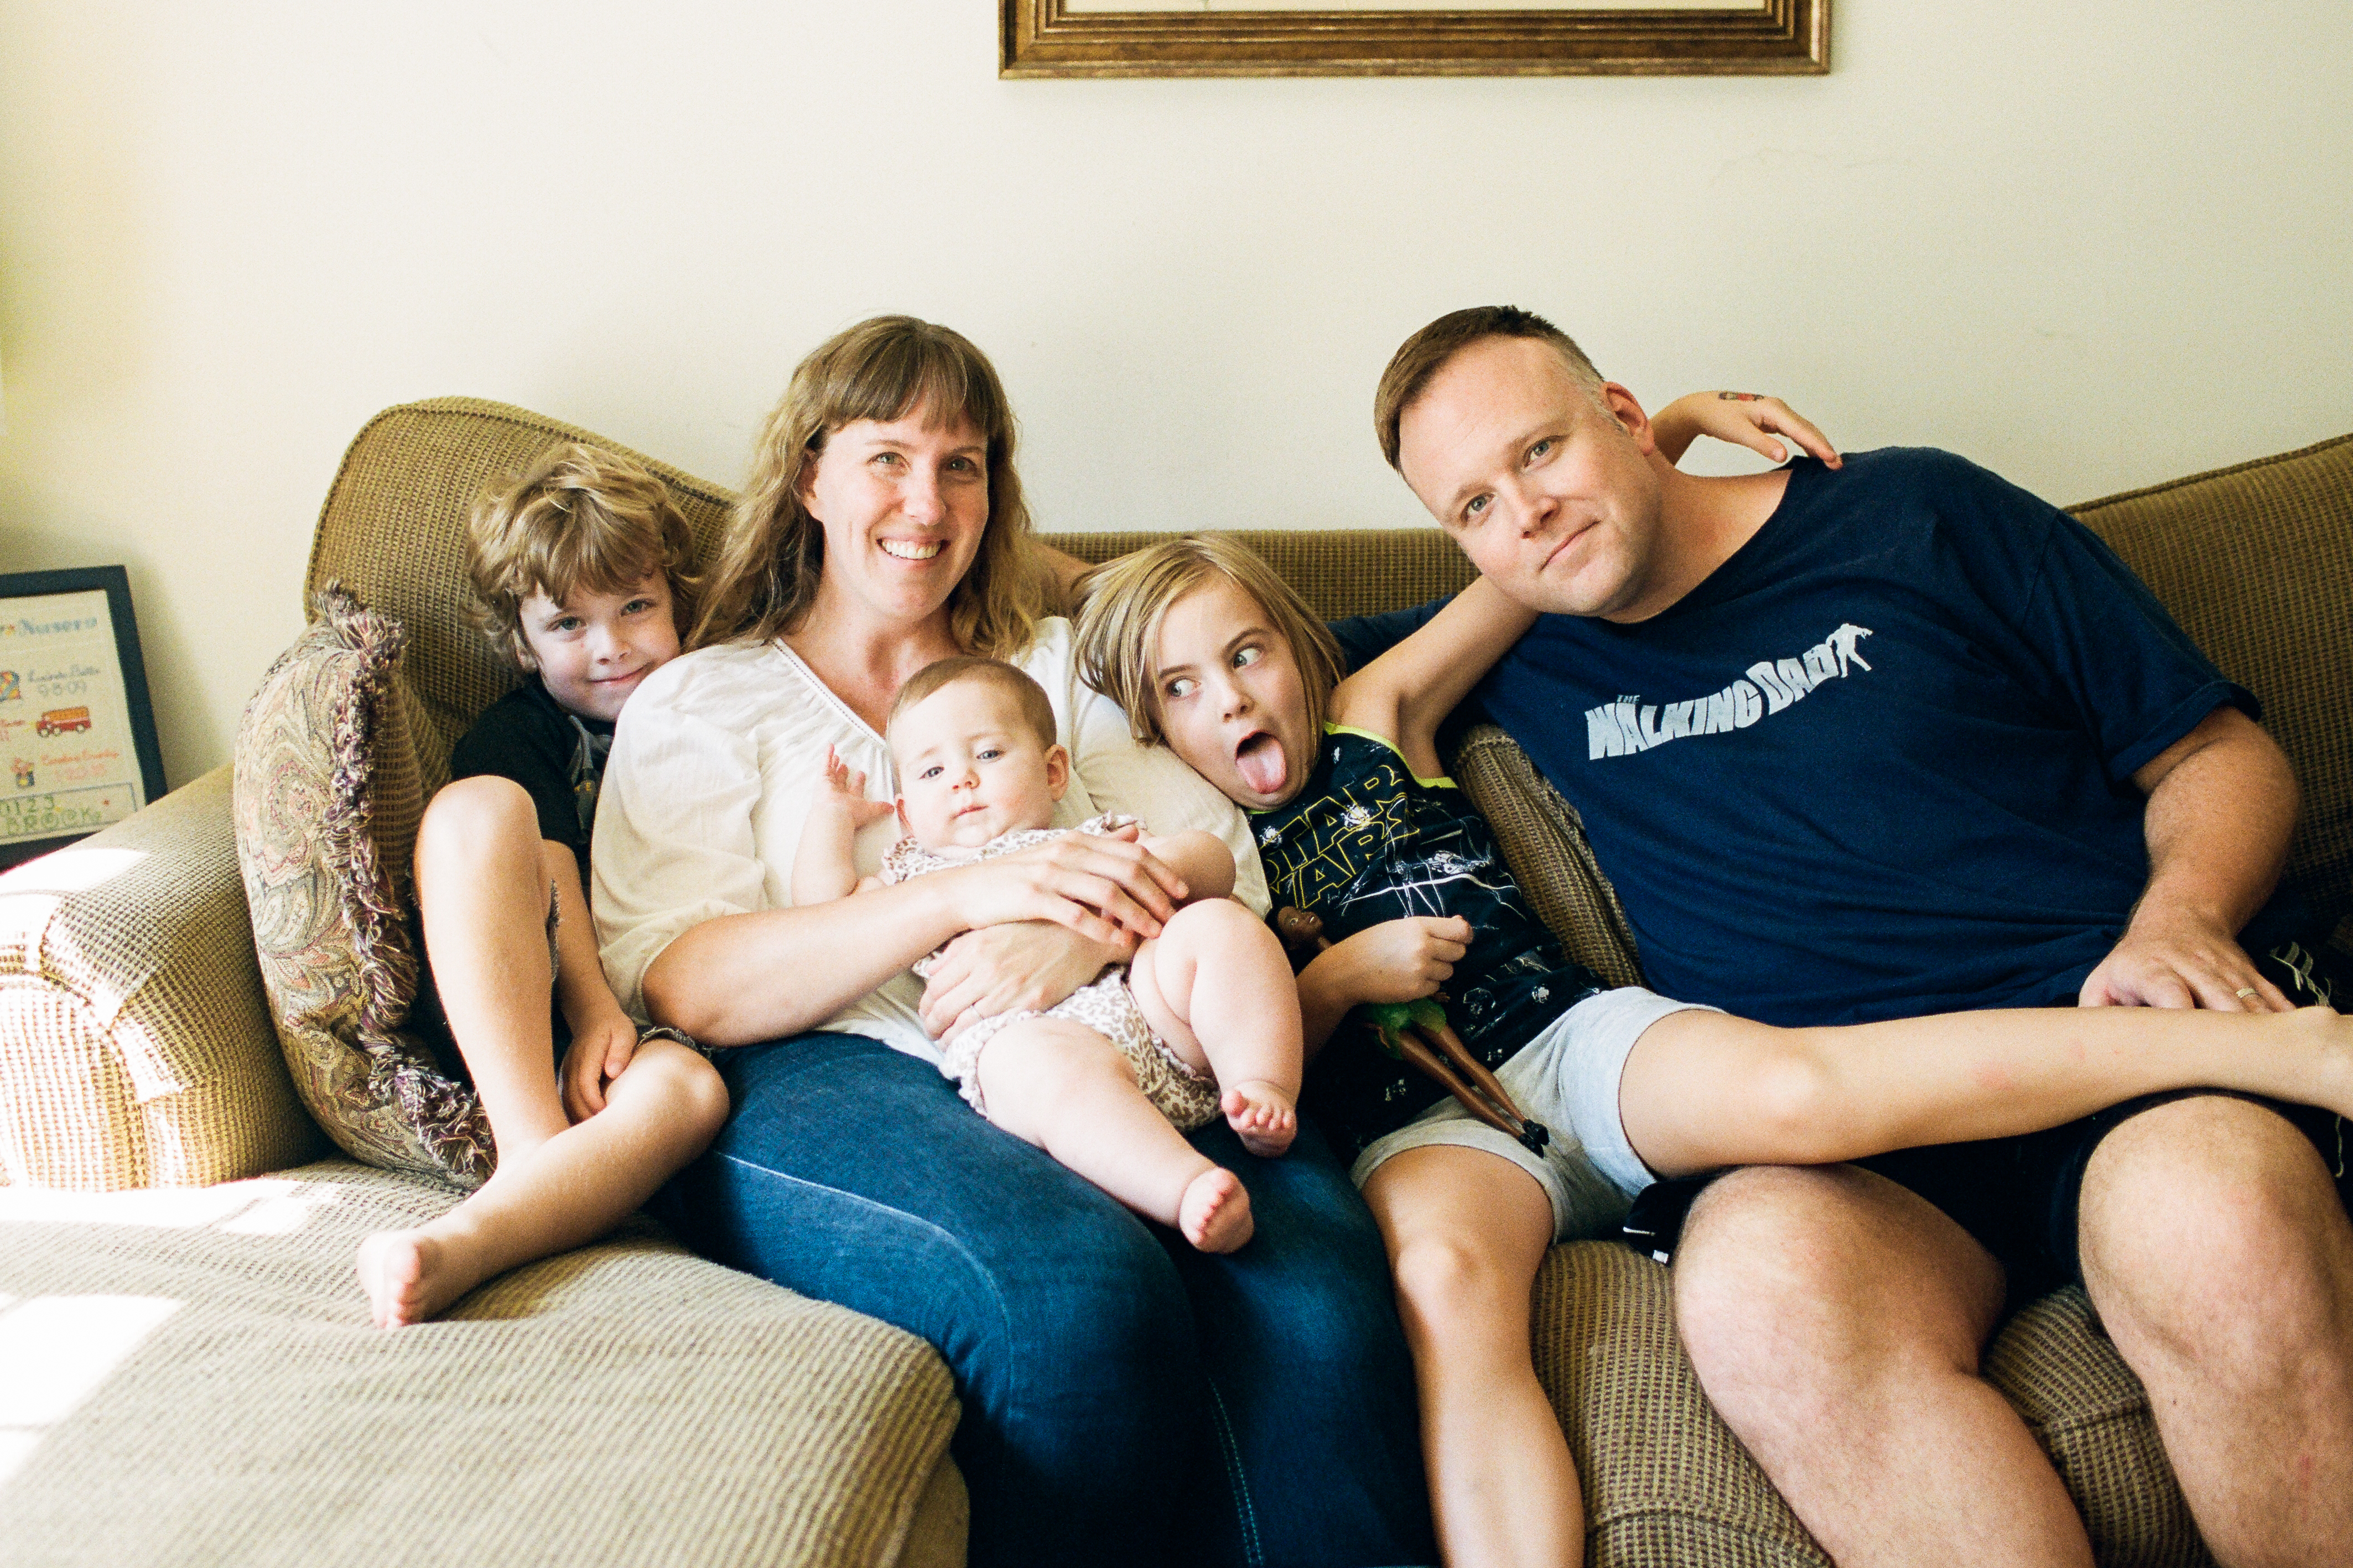 Contact Jenny Corbett! Jenny Corbett is pictured with her family, two young children and her husband on a couch, with her baby on her lap. 